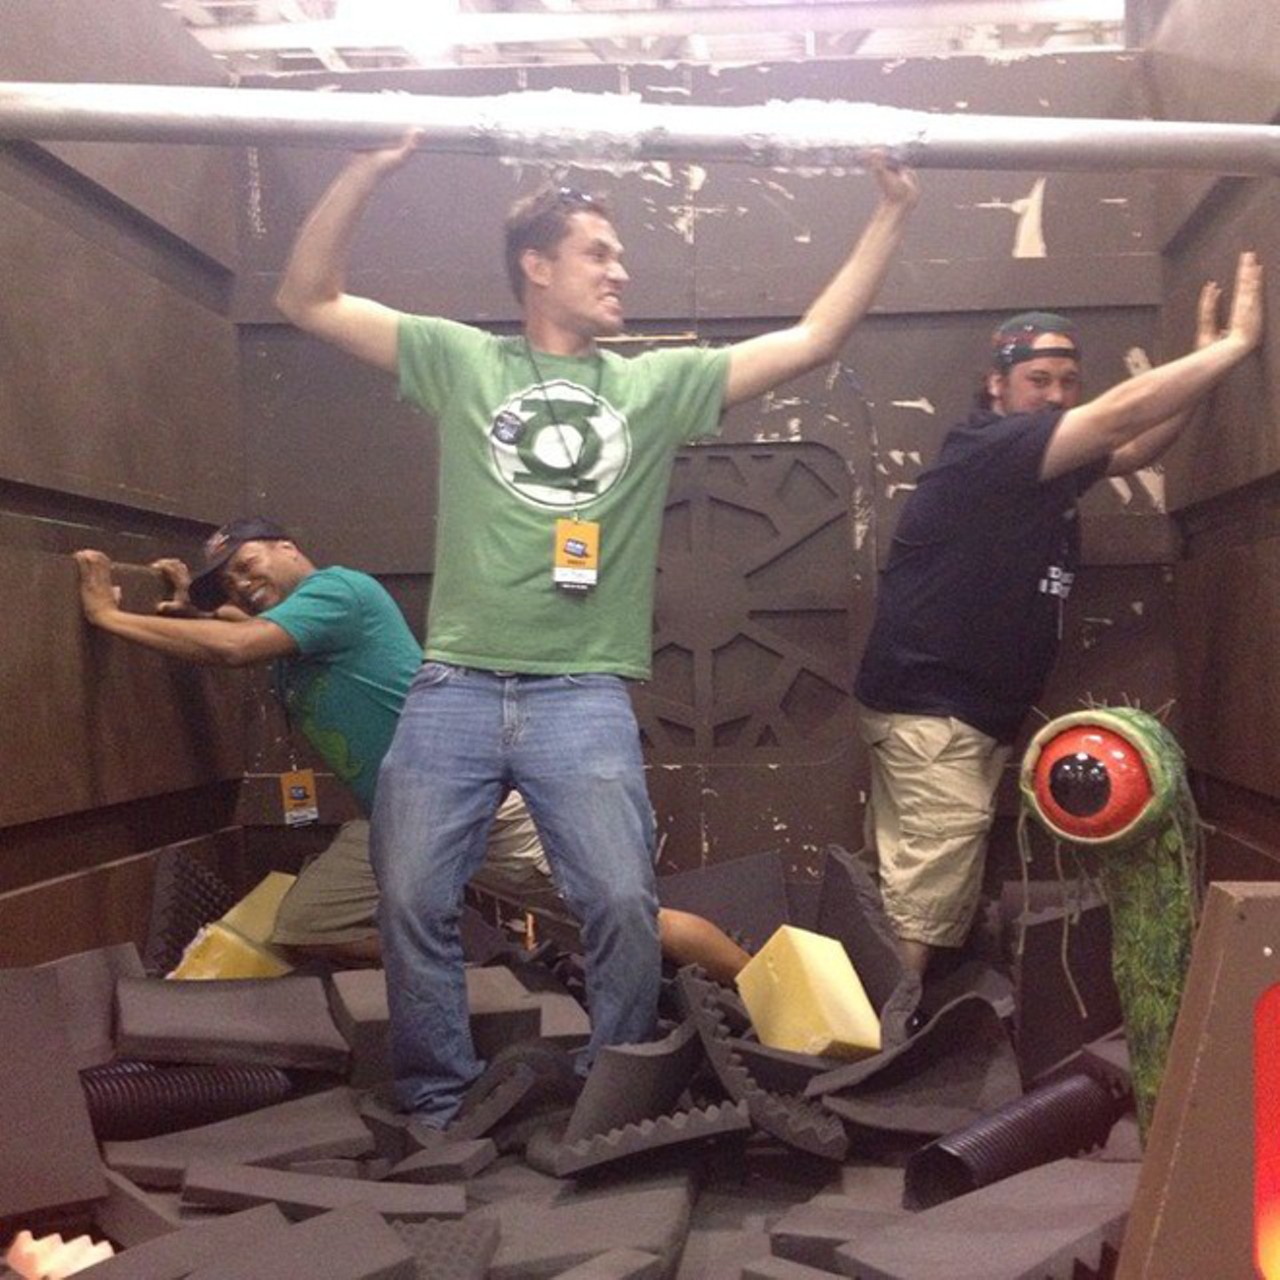 You could get crushed in a trash compactor while trying to escape prison.
Photo via Instagram user tommorganradio